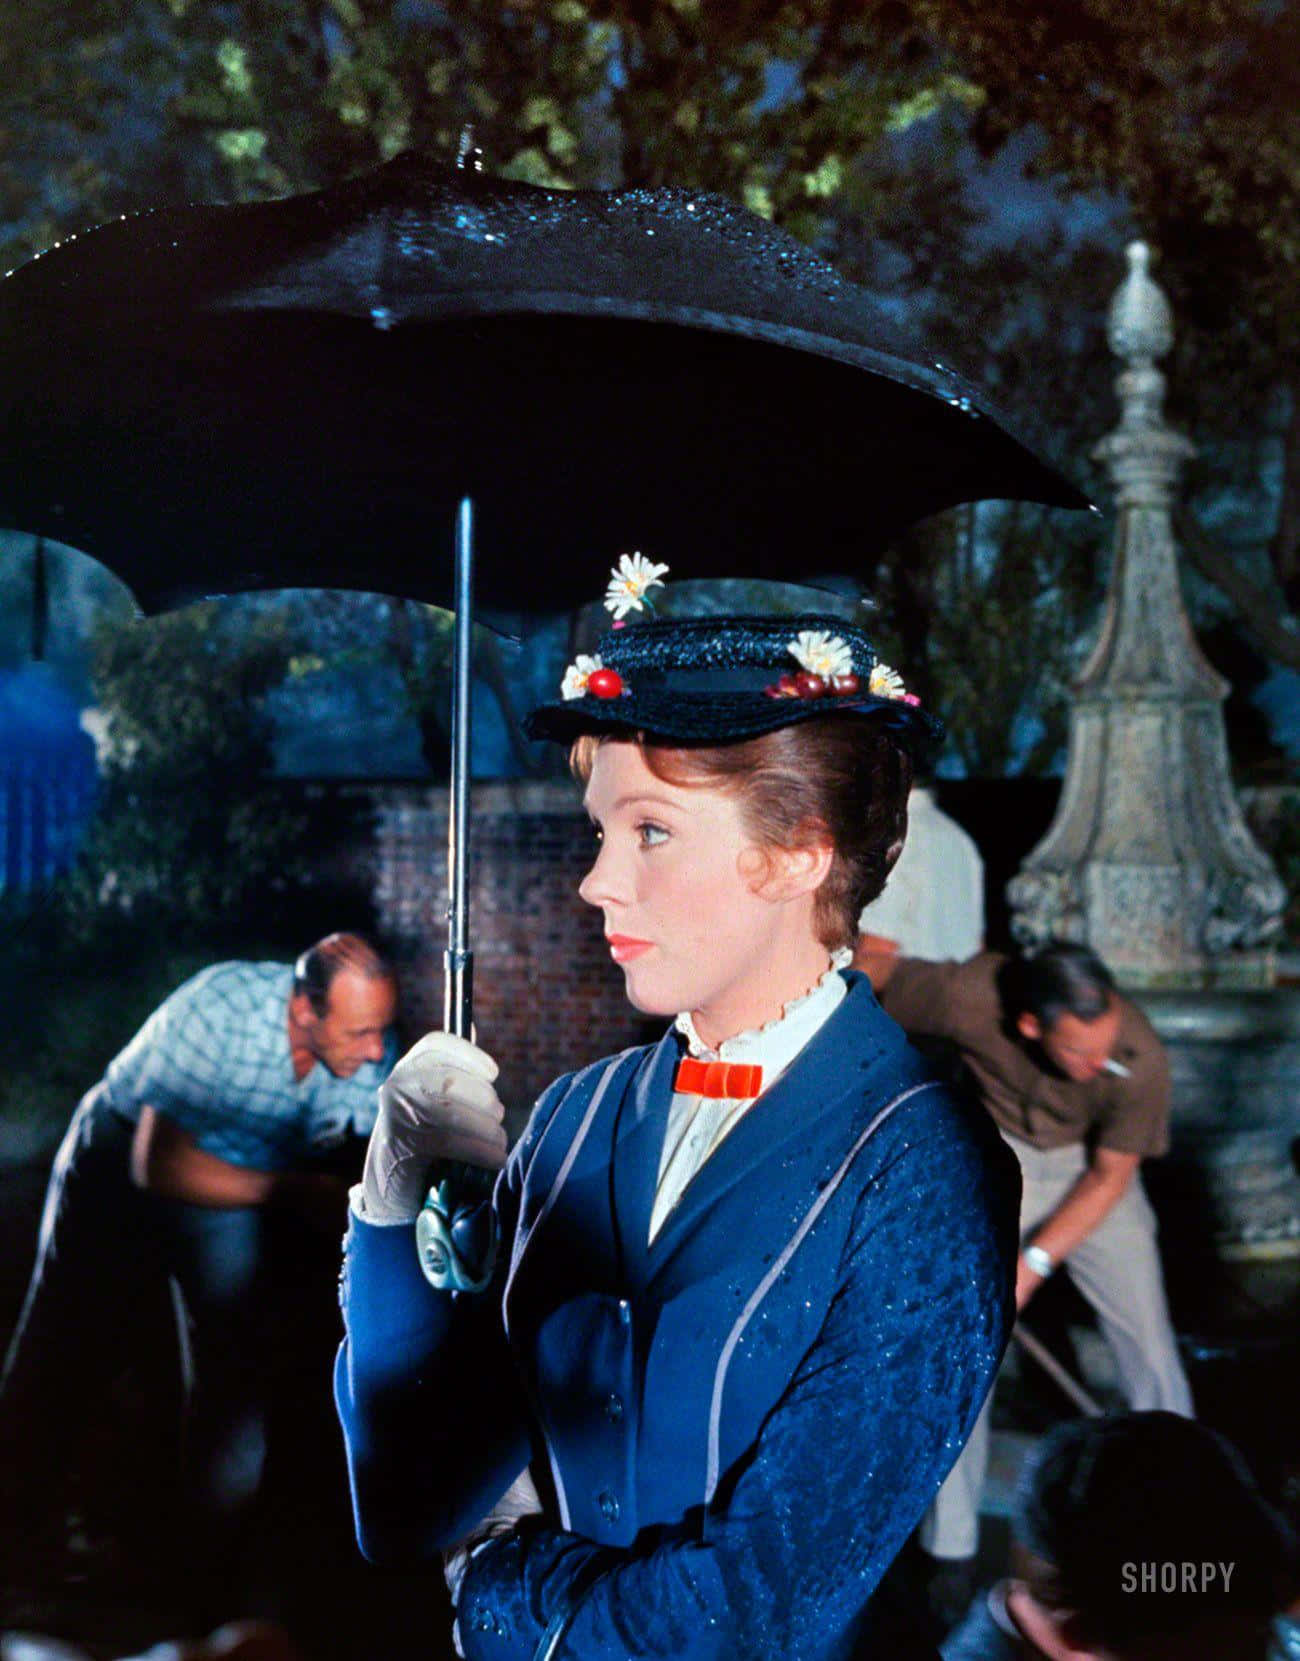 Mary Poppins Soaring Through The Sky With Her Umbrella